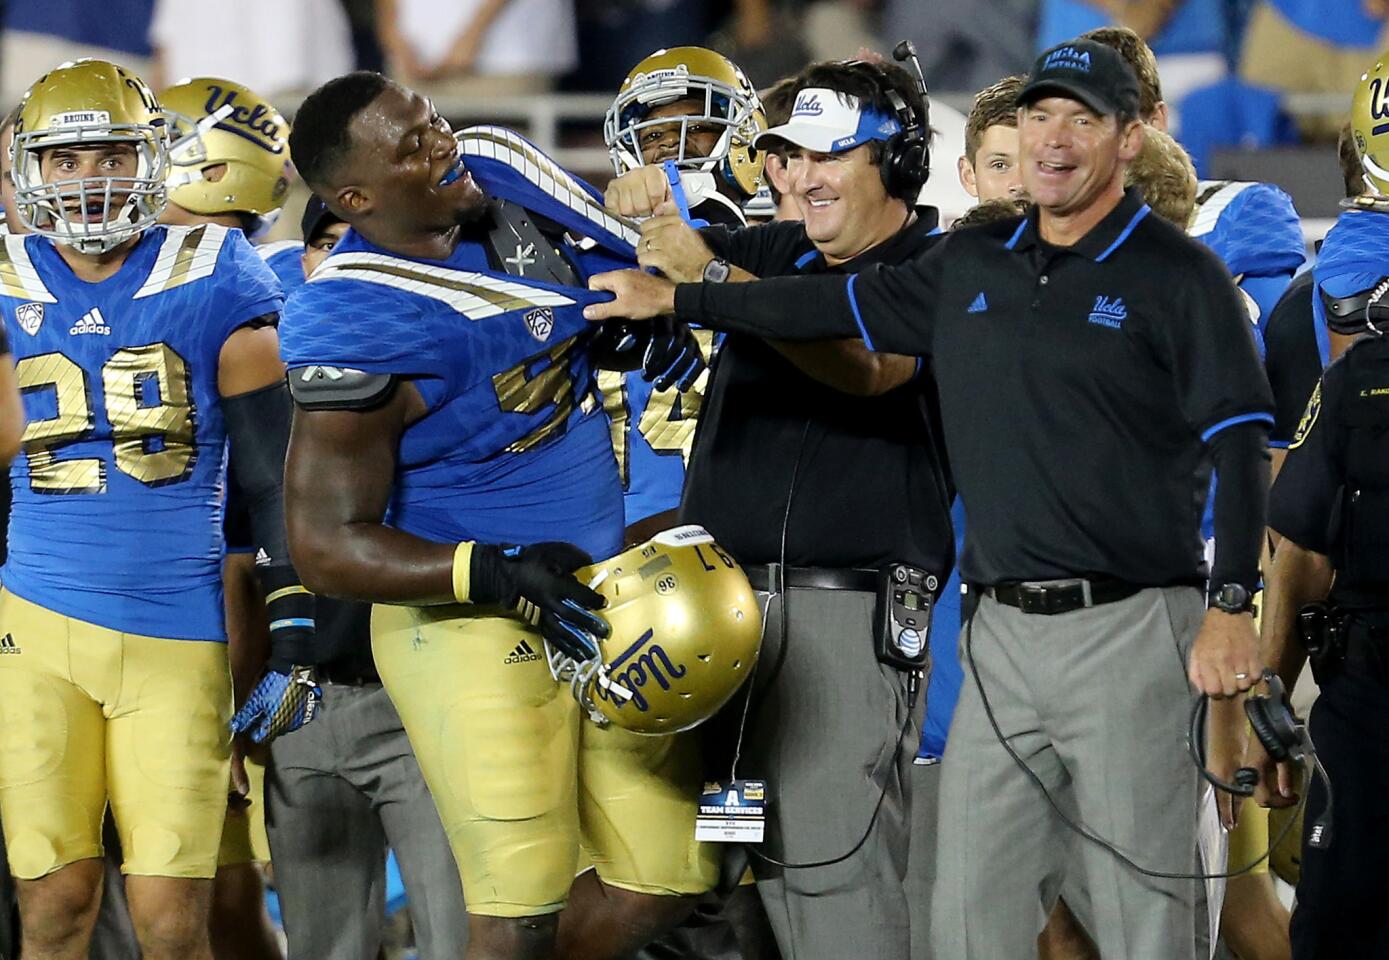 UCLA Coach Jim Mora, right, shares a light moment with defensive lineman Kenny Clark after the Bruins' 24-23 victory over BYU earlier this season.